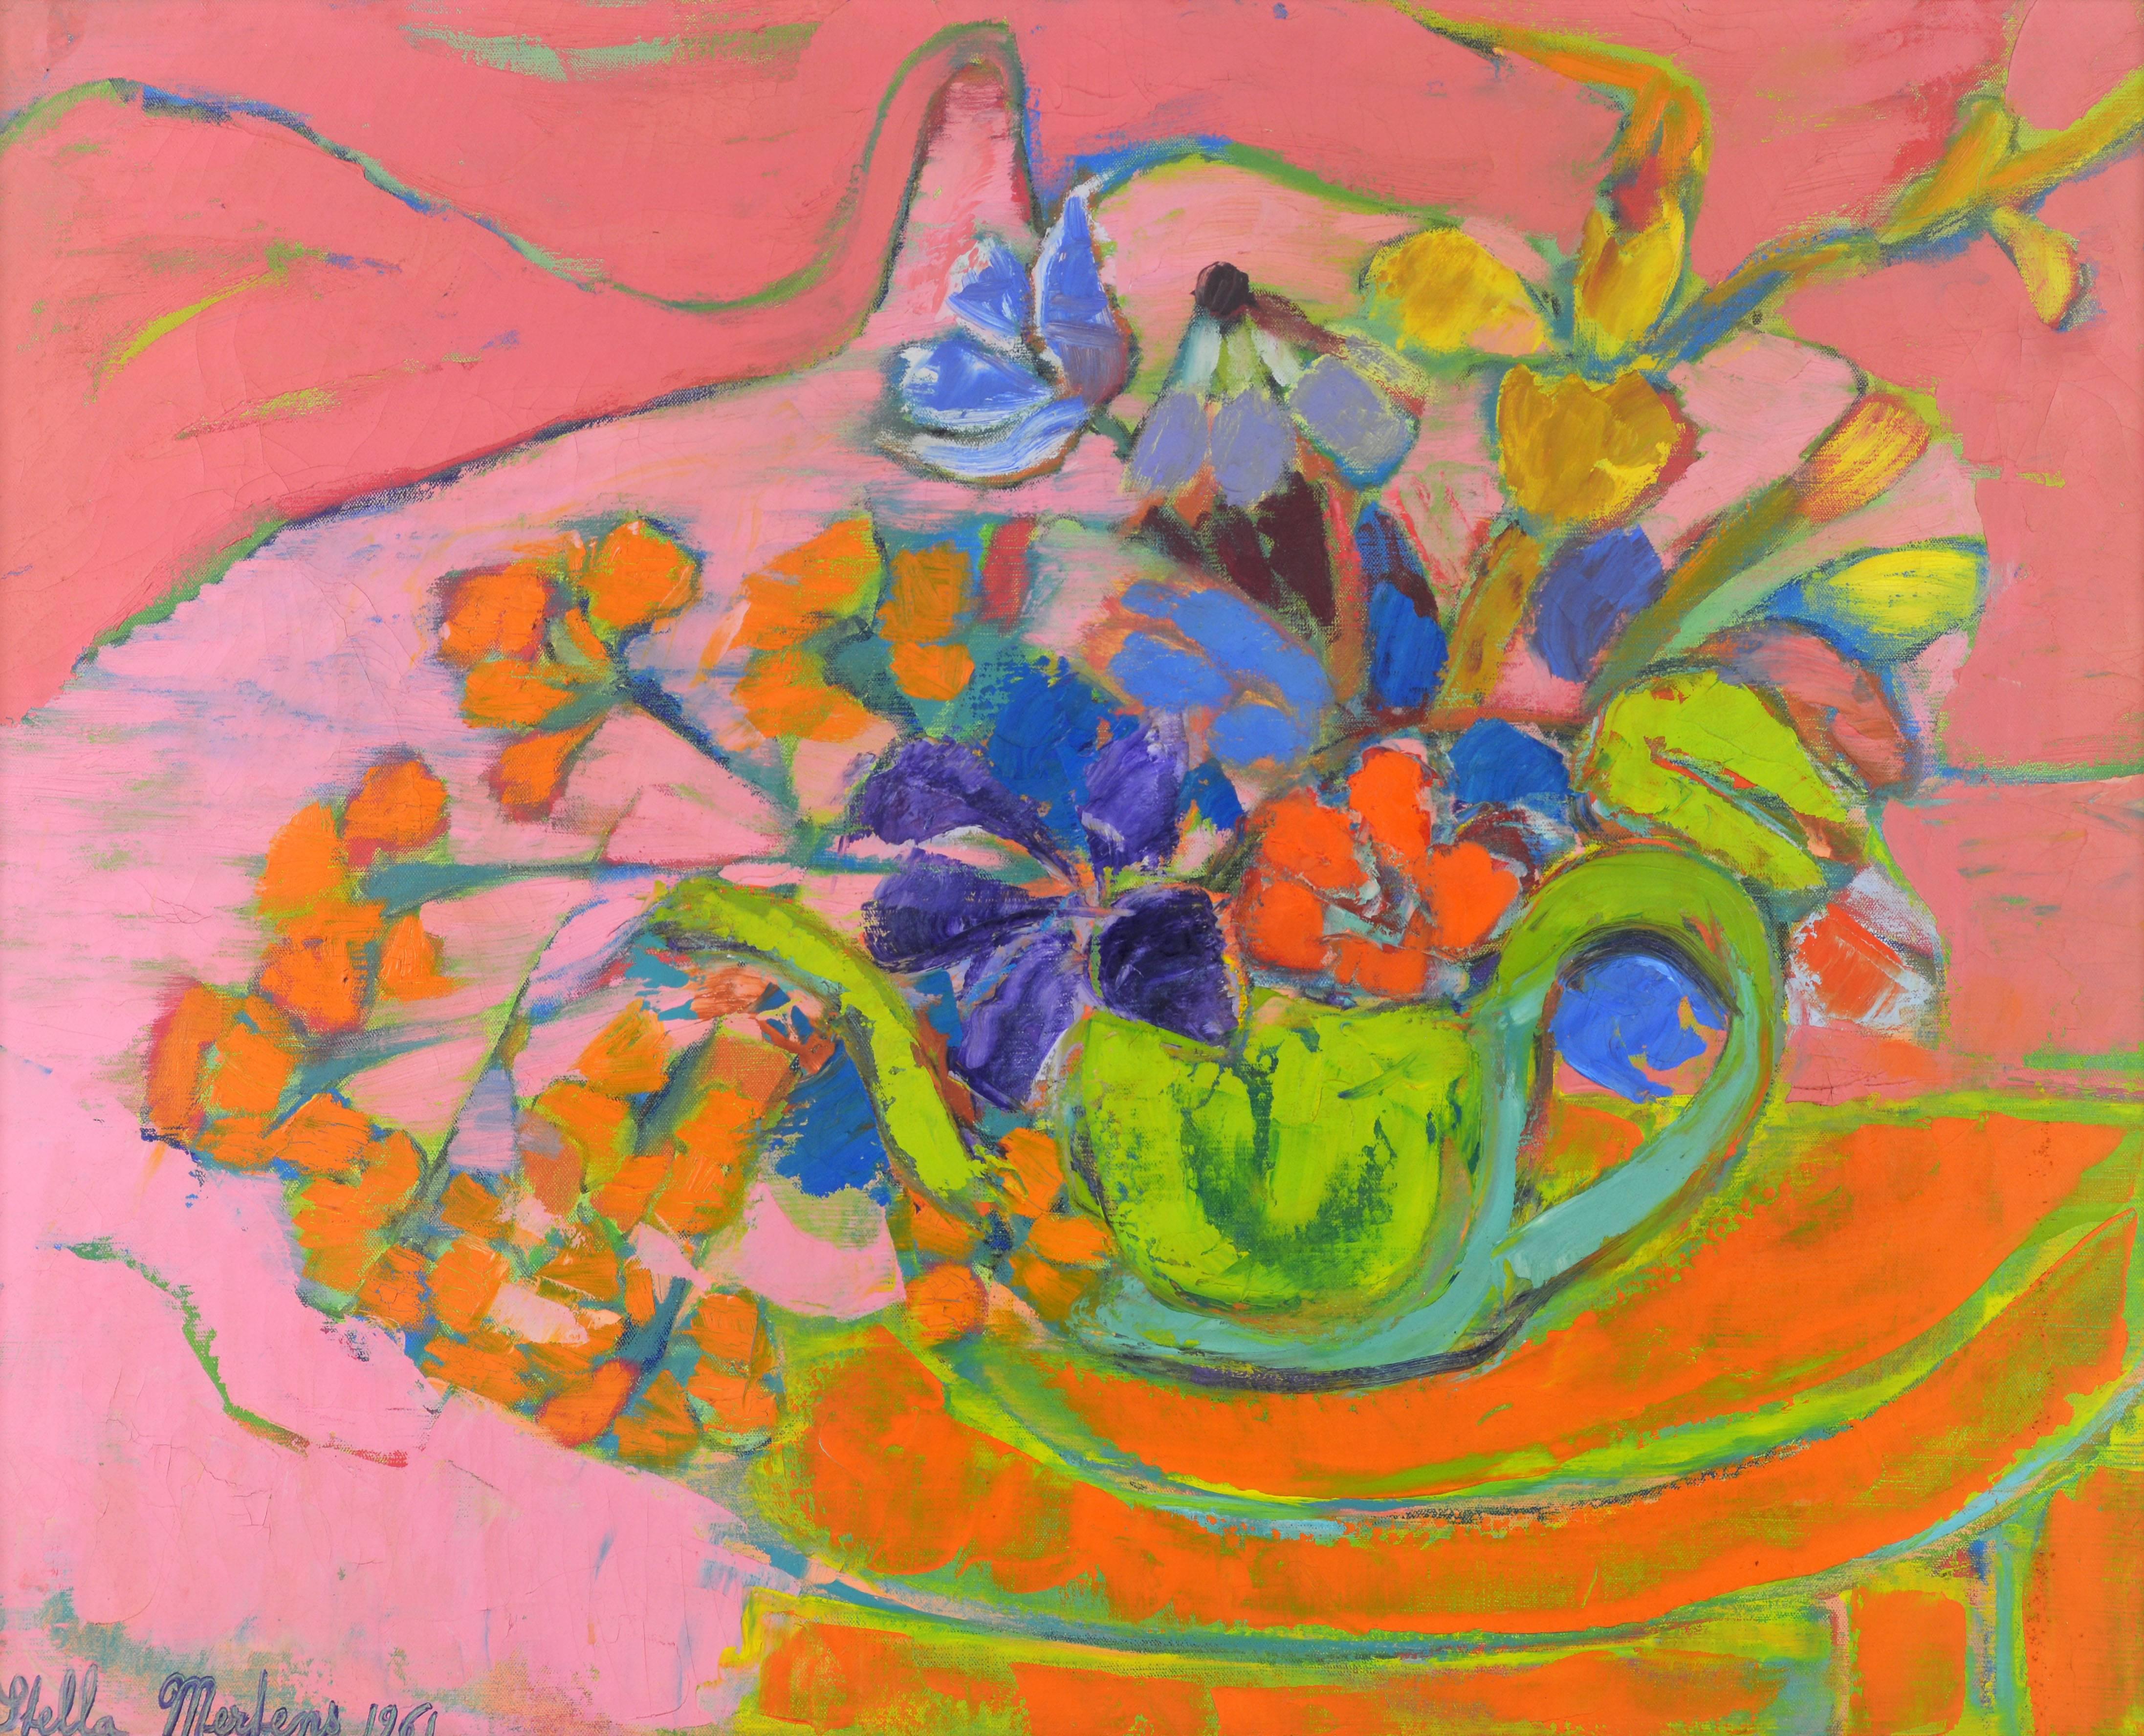 'Garden Flowers'
by Stella Mertens, Belgian/French 1896-1986.
25.5 x 32 in. without frame, 31 x 37.5 in. including frame.
Oil on canvas, signed and dated 1961.
Housed in a later gold finish gallery frame.

Stella Mertens:
Scott Youmans– 1965: